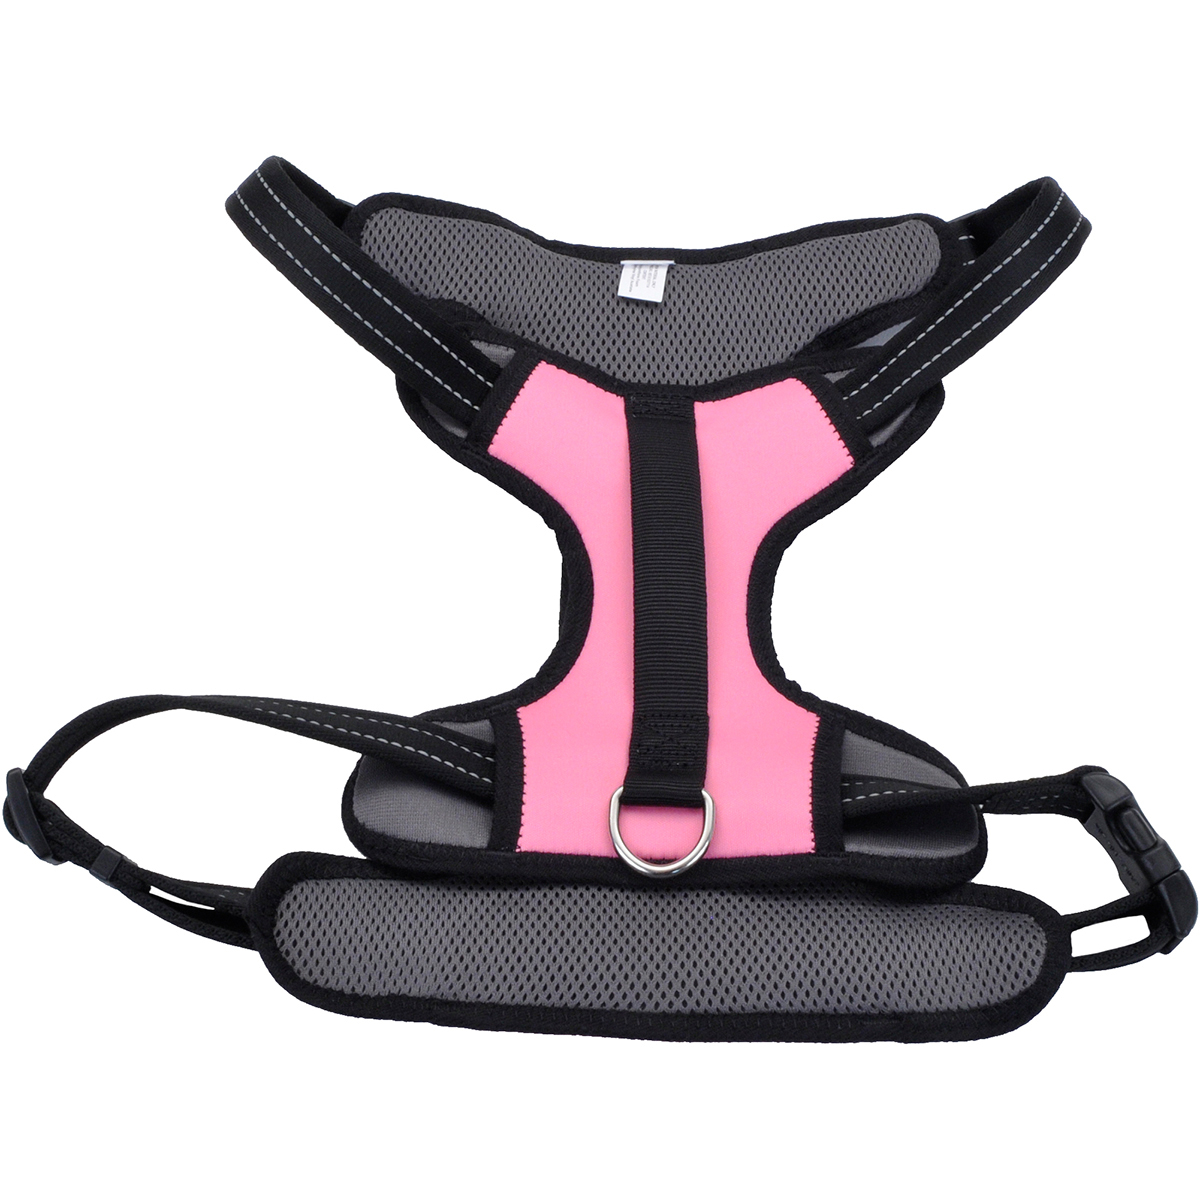 06989pkx Control Handle Harness, Pink - Extra Large